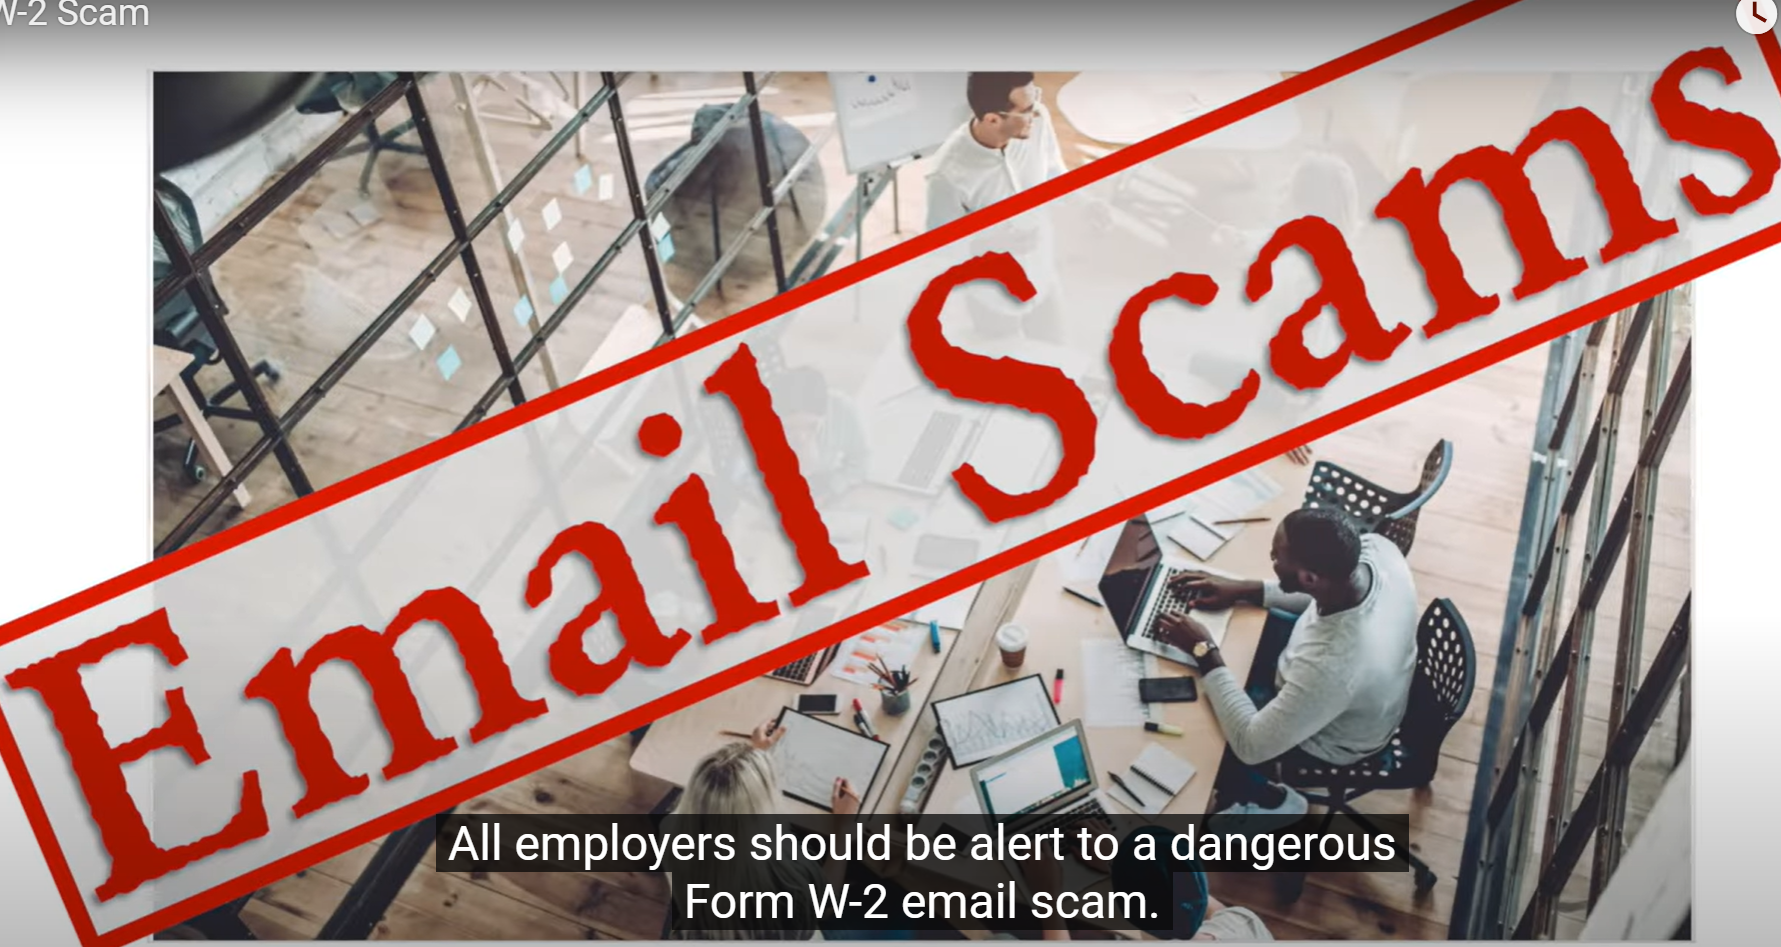 Find out how identity thieves are using email to impersonate your company’s executives to steal your workers’ W-2 forms